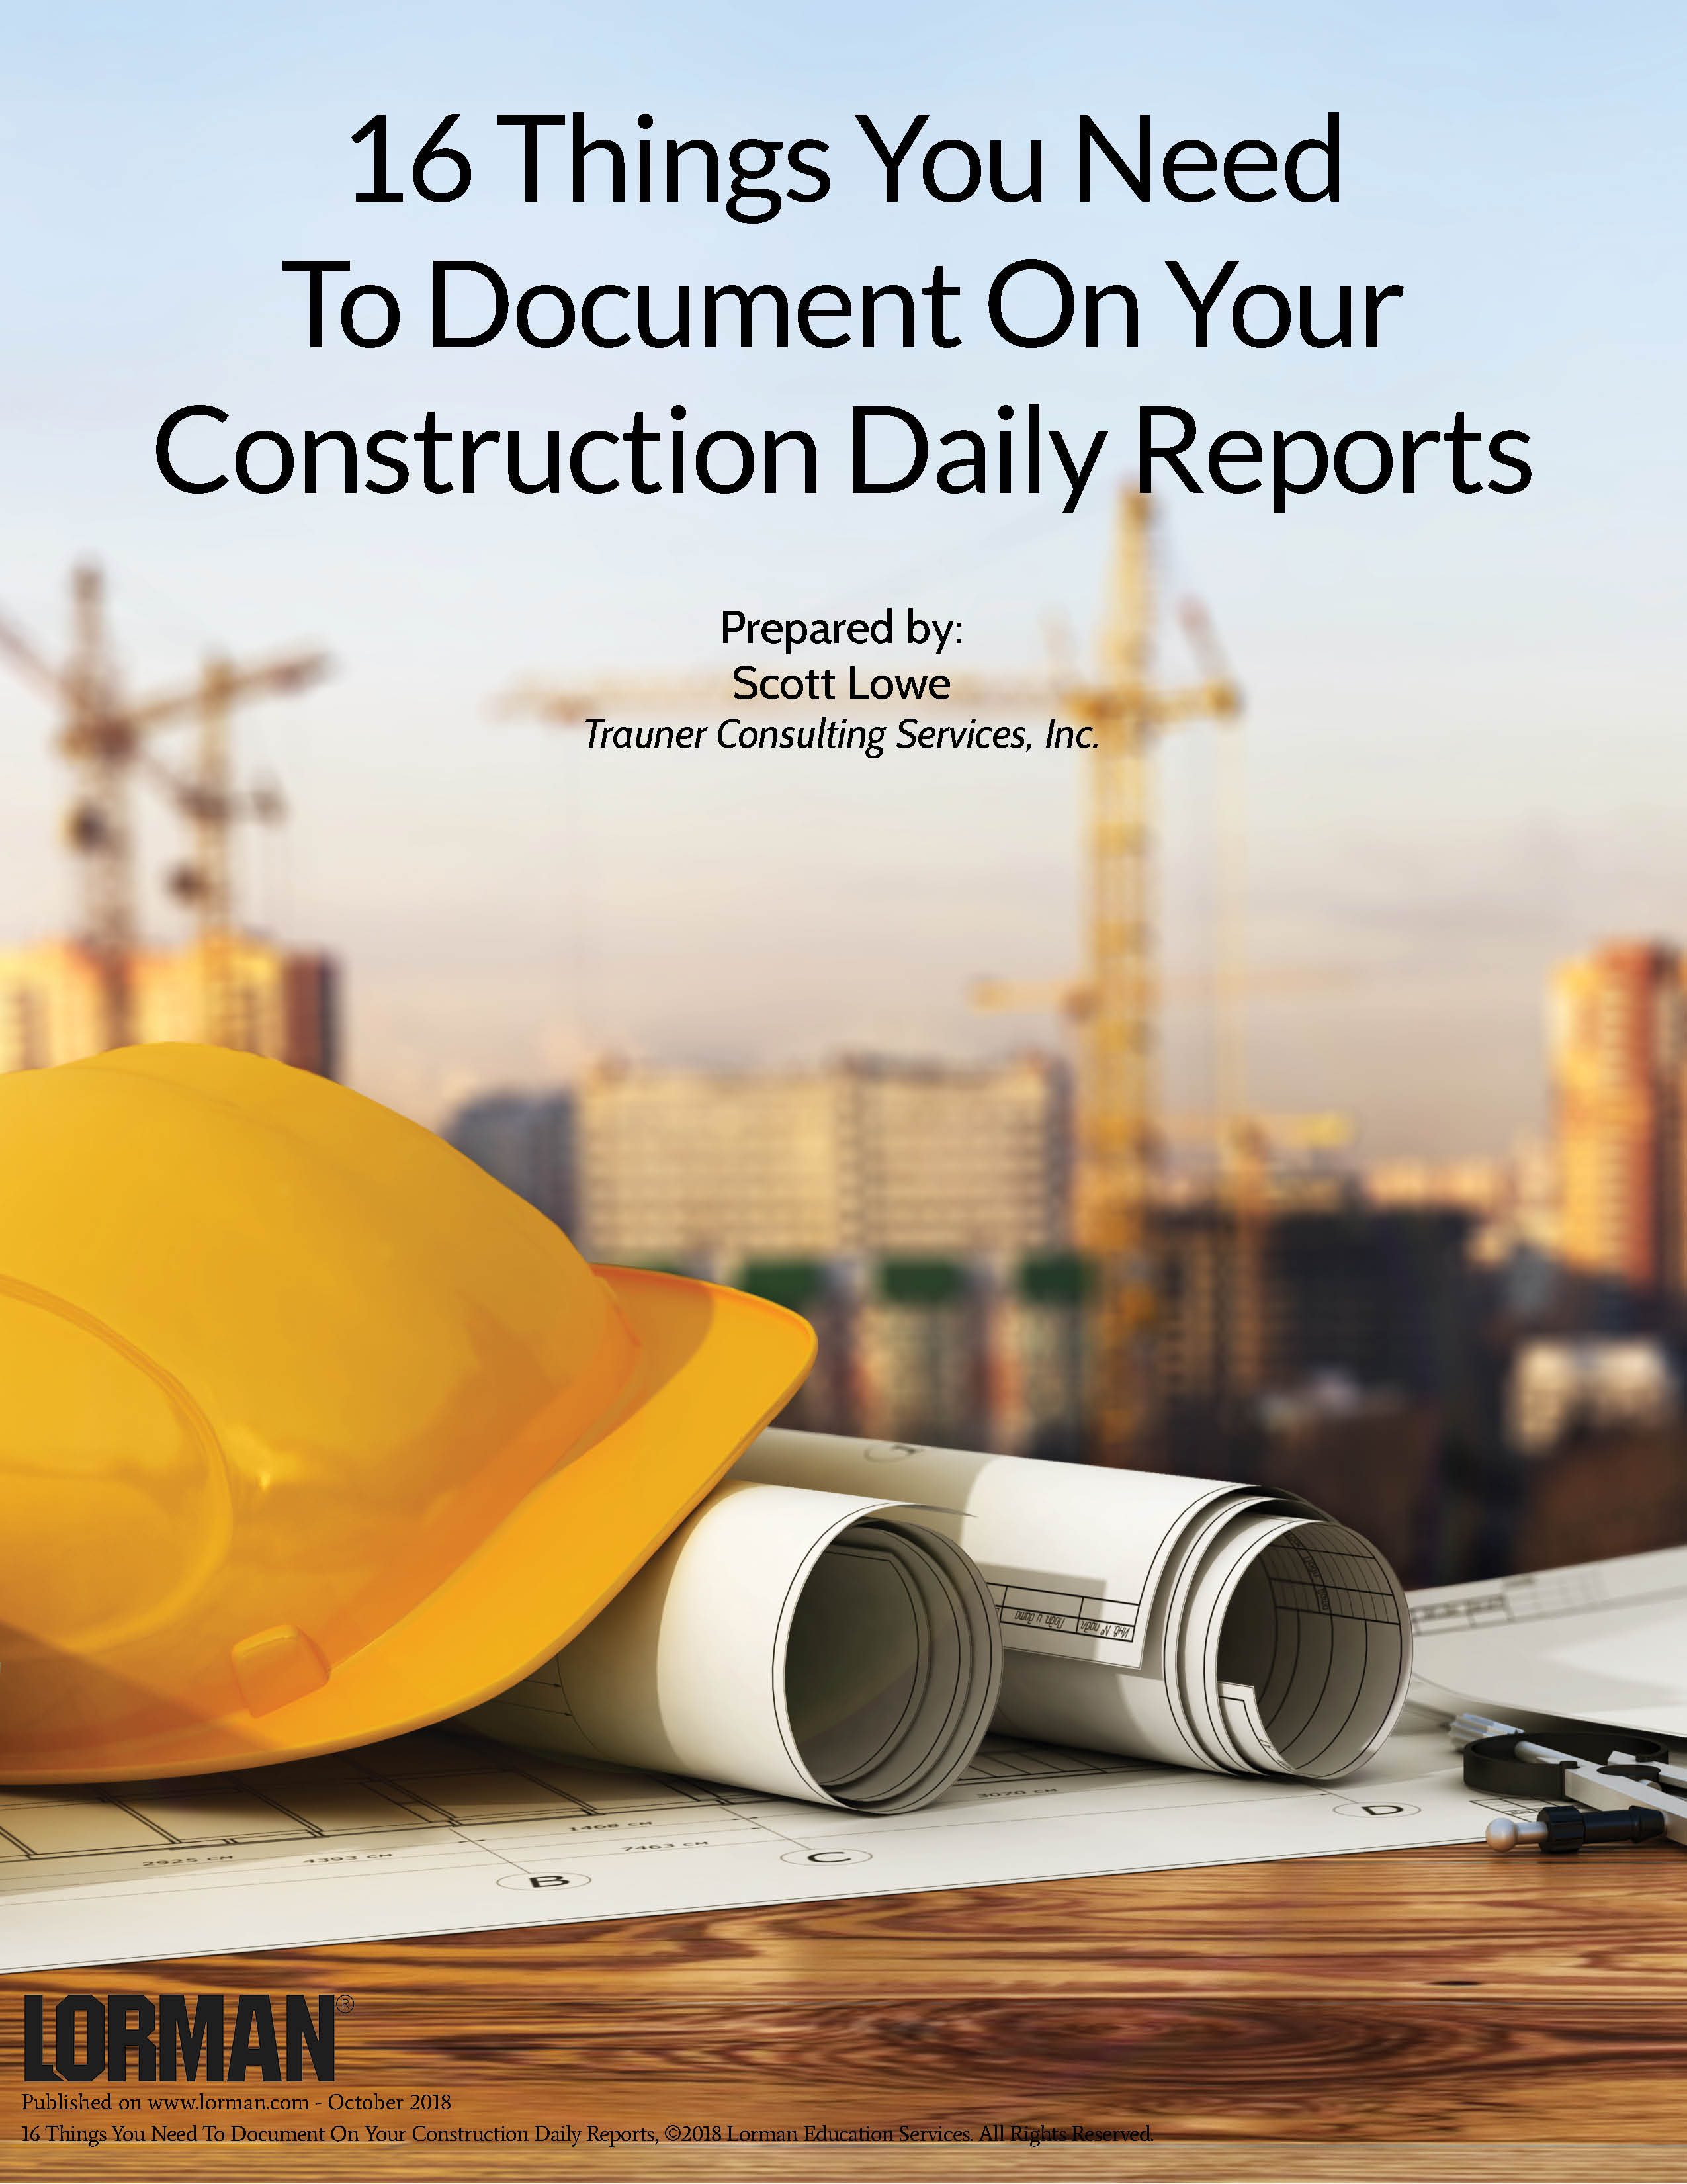 16 Things You Need To Document On Your Construction Daily Reports